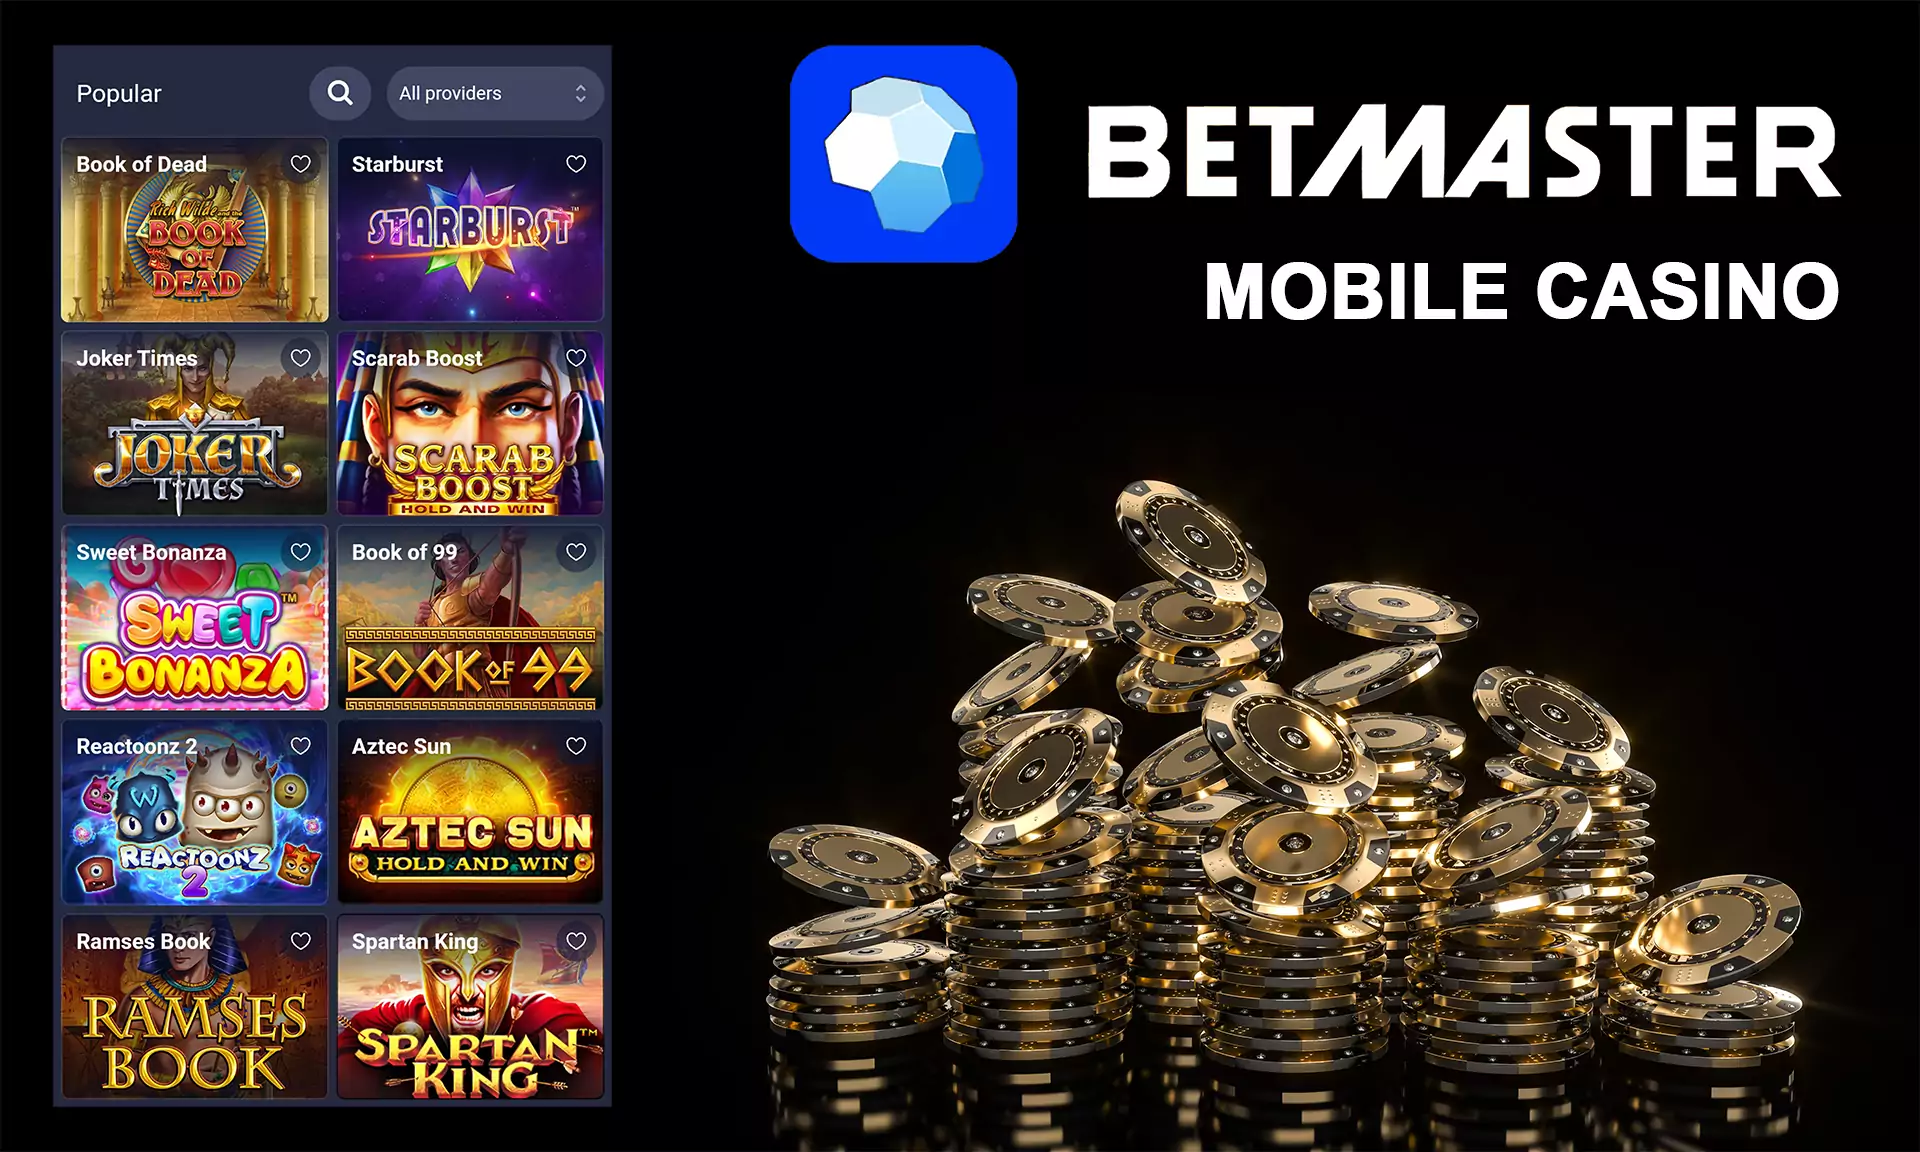 Casino fans can play slots and table games in a mobile browser or in the app.